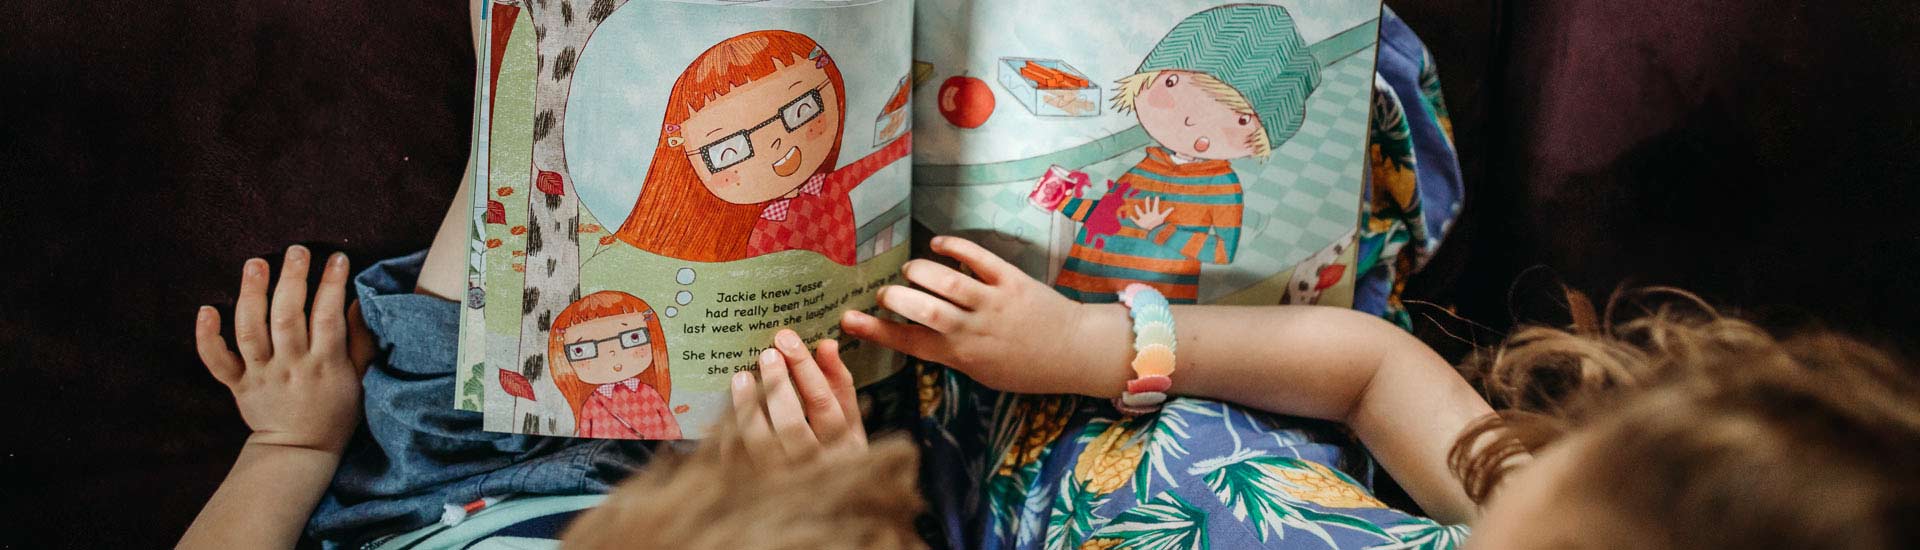 Jewish bedtime stories and music for FREE! PJ Library mails Jewish children's books & music to families.